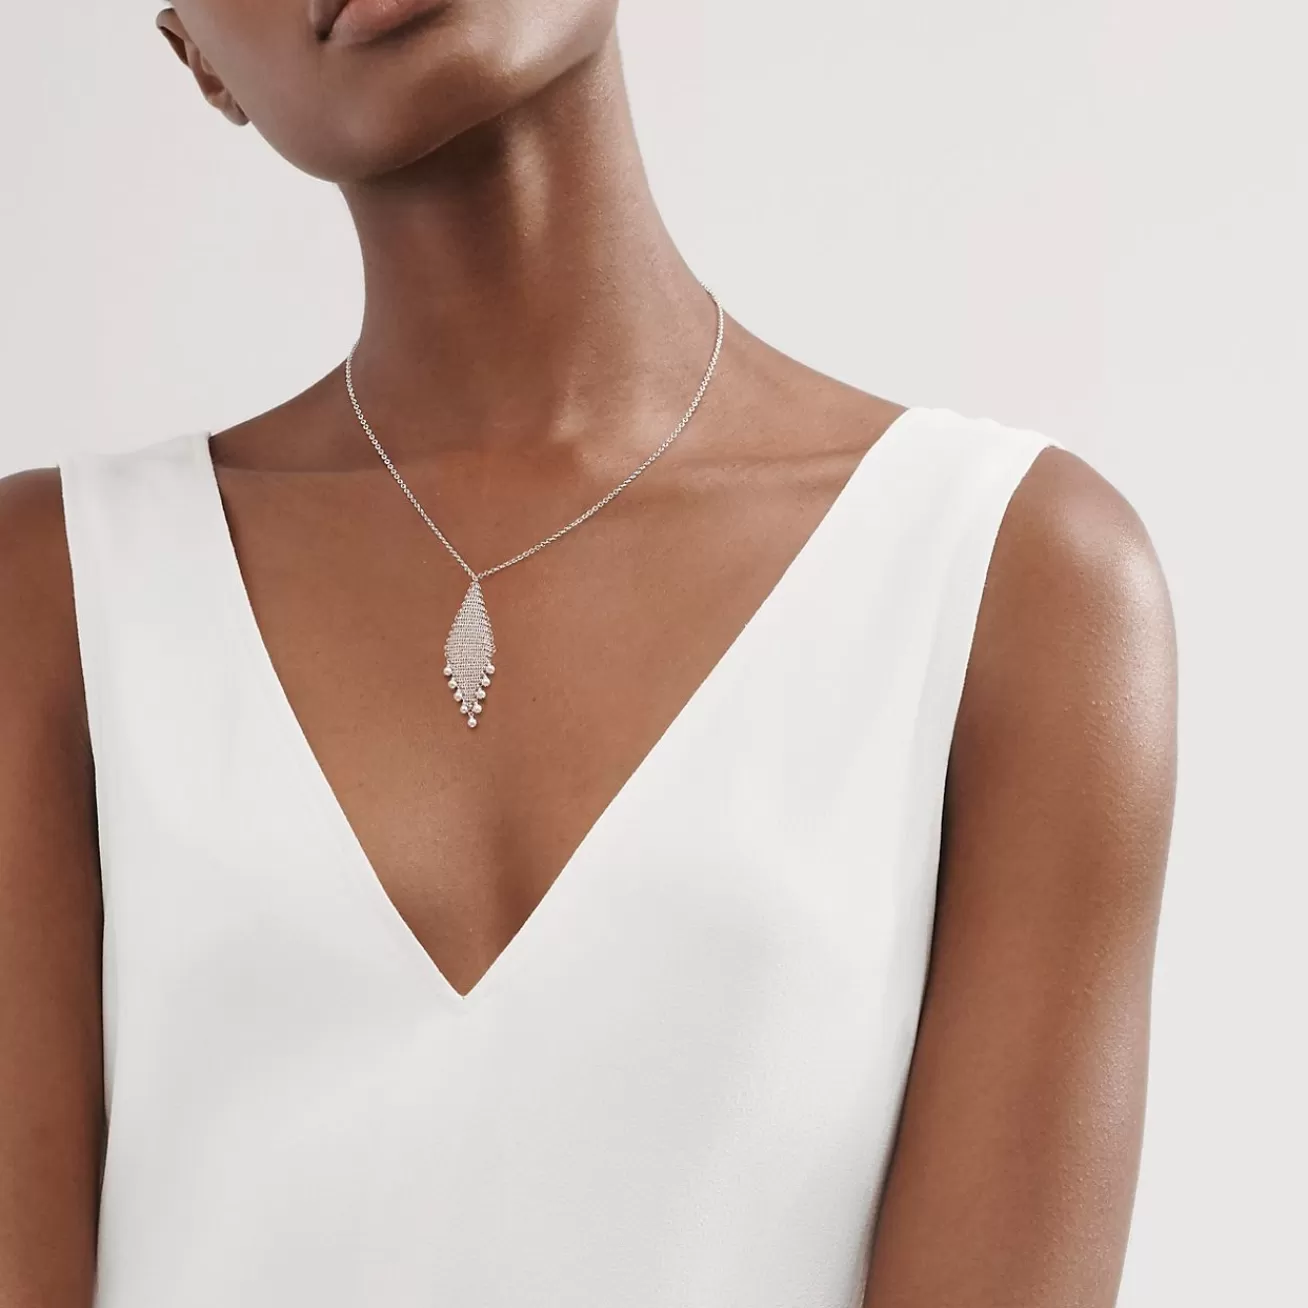 Tiffany & Co. Elsa Peretti® Mesh fringe pendant in sterling silver with freshwater pearls. | ^ Necklaces & Pendants | Sterling Silver Jewelry